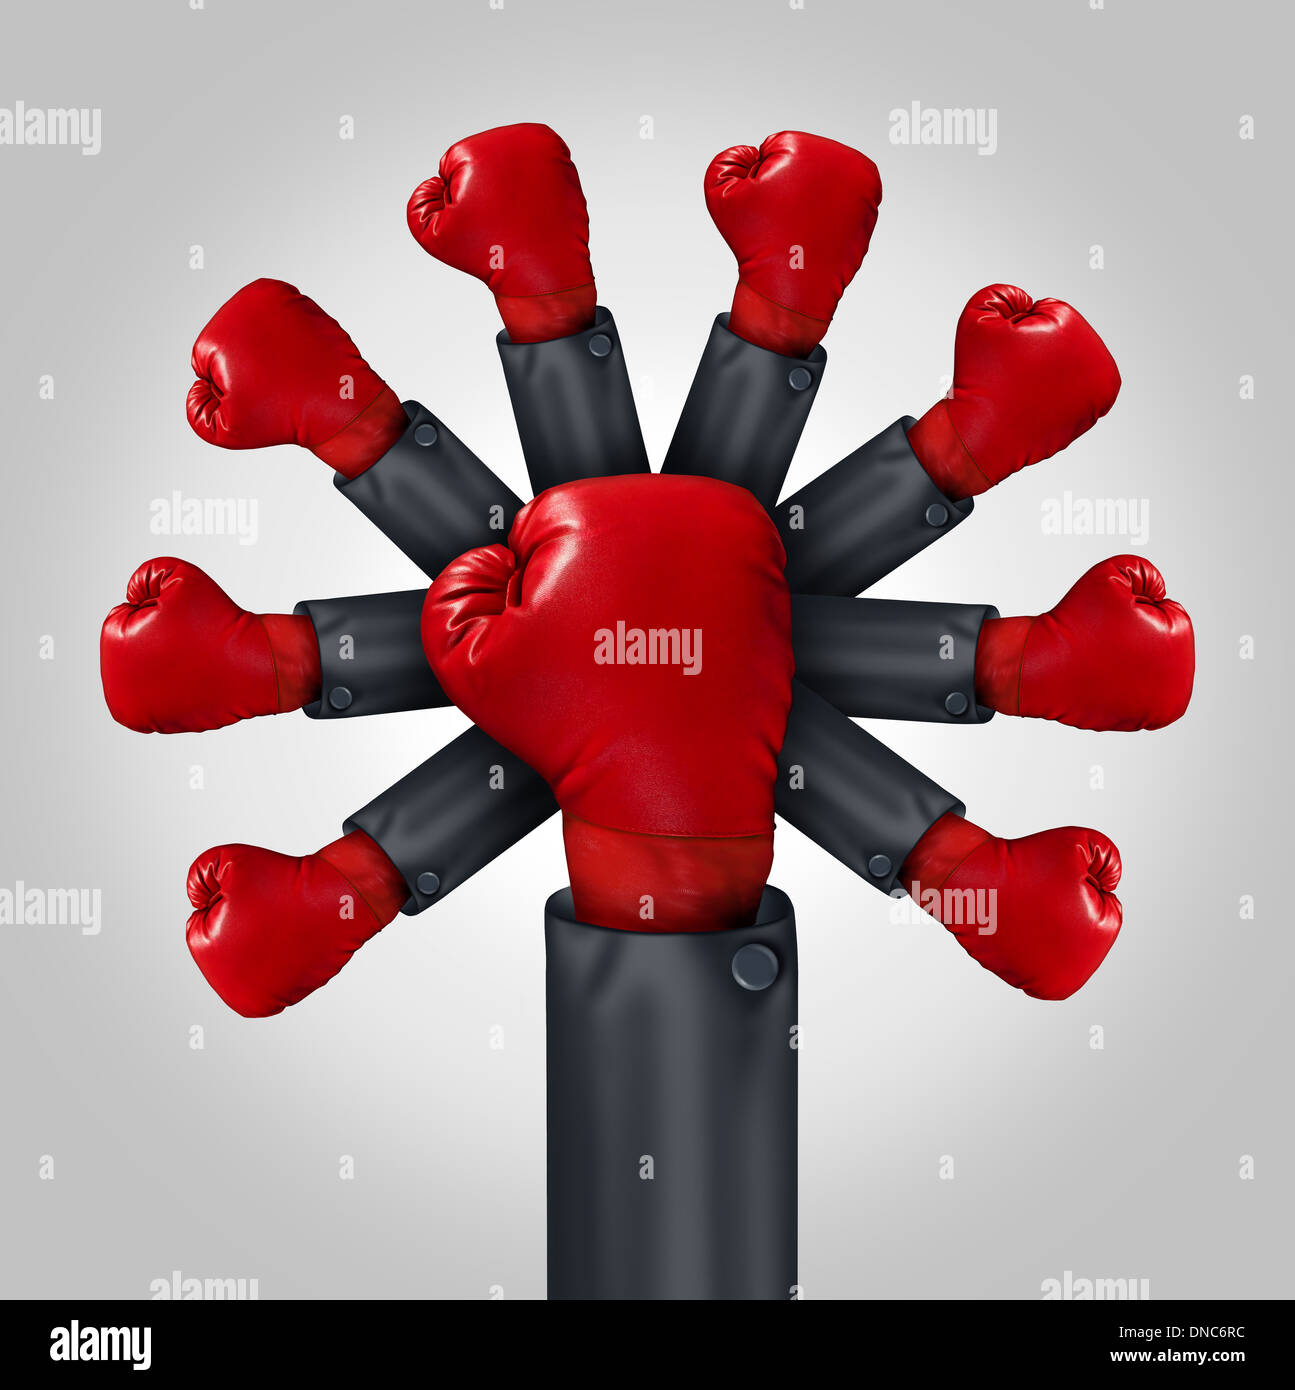 Increasing Competitiveness business leadership concept with the arm of a businessman wearing a red boxing glove and a group of gloves emerging from the leader as a metaphor for organized competition and team strength. Stock Photo